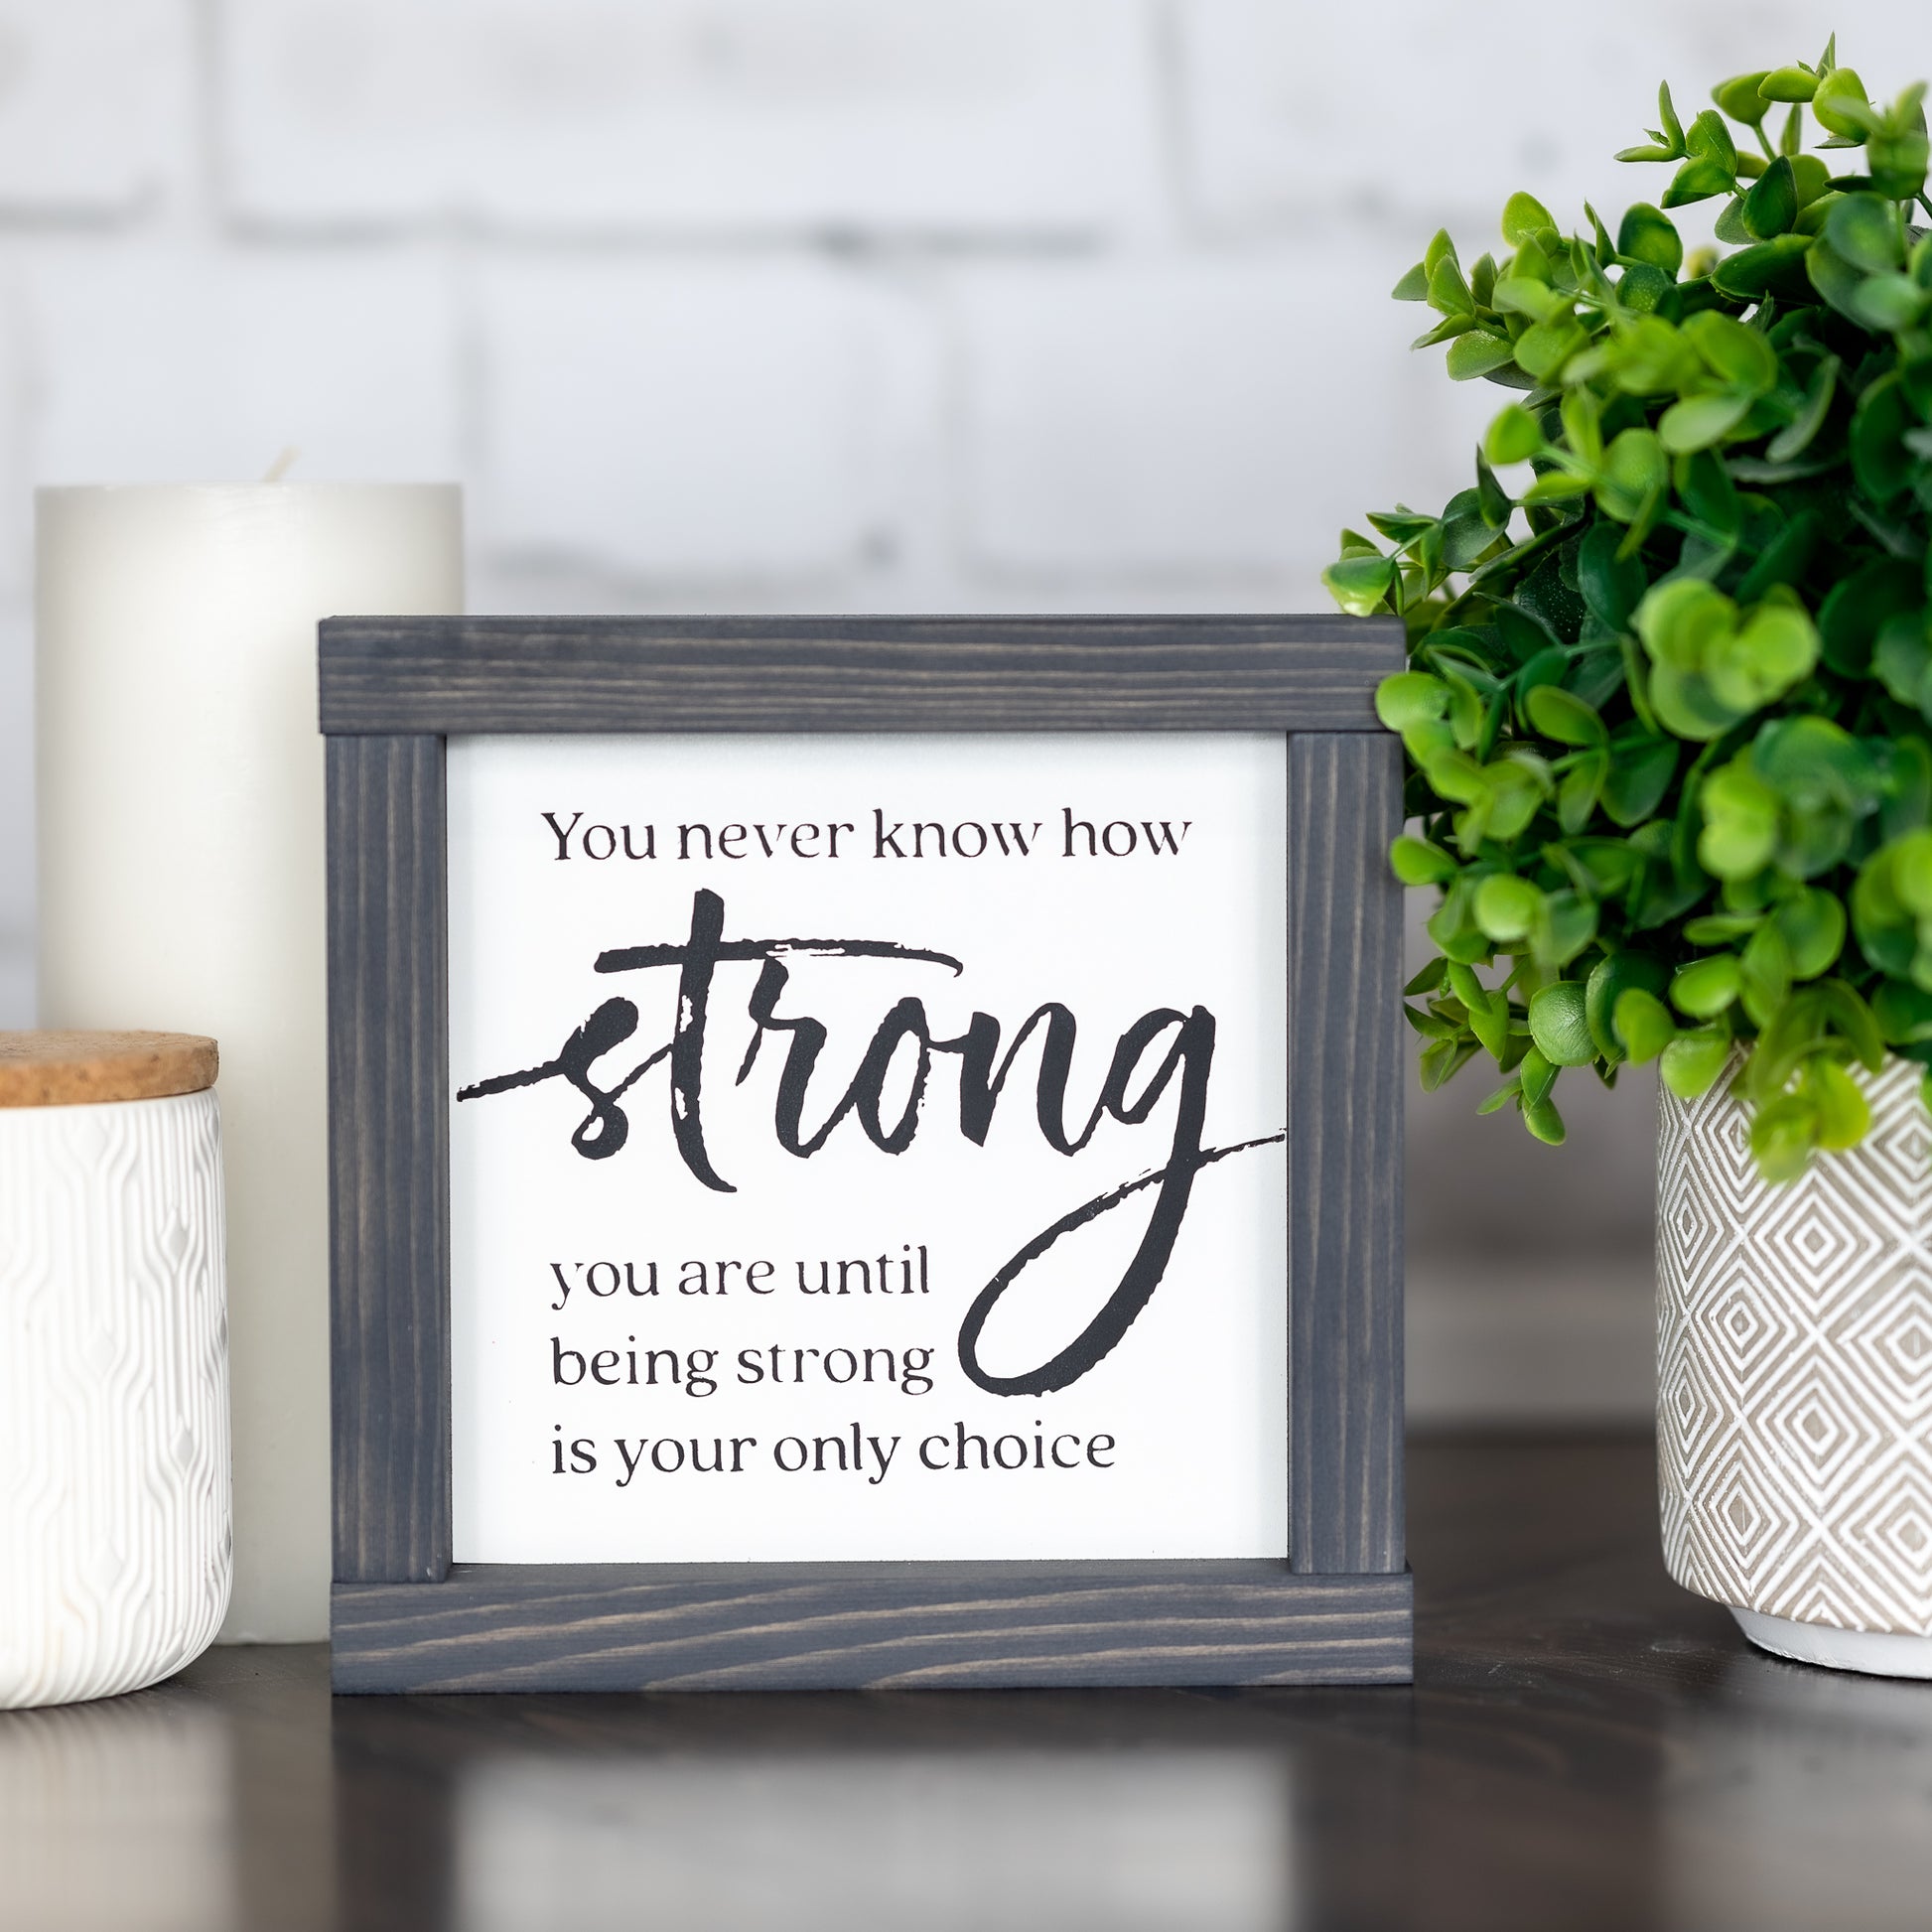 you never know how strong you are until strong is your only choice ~ mini sign